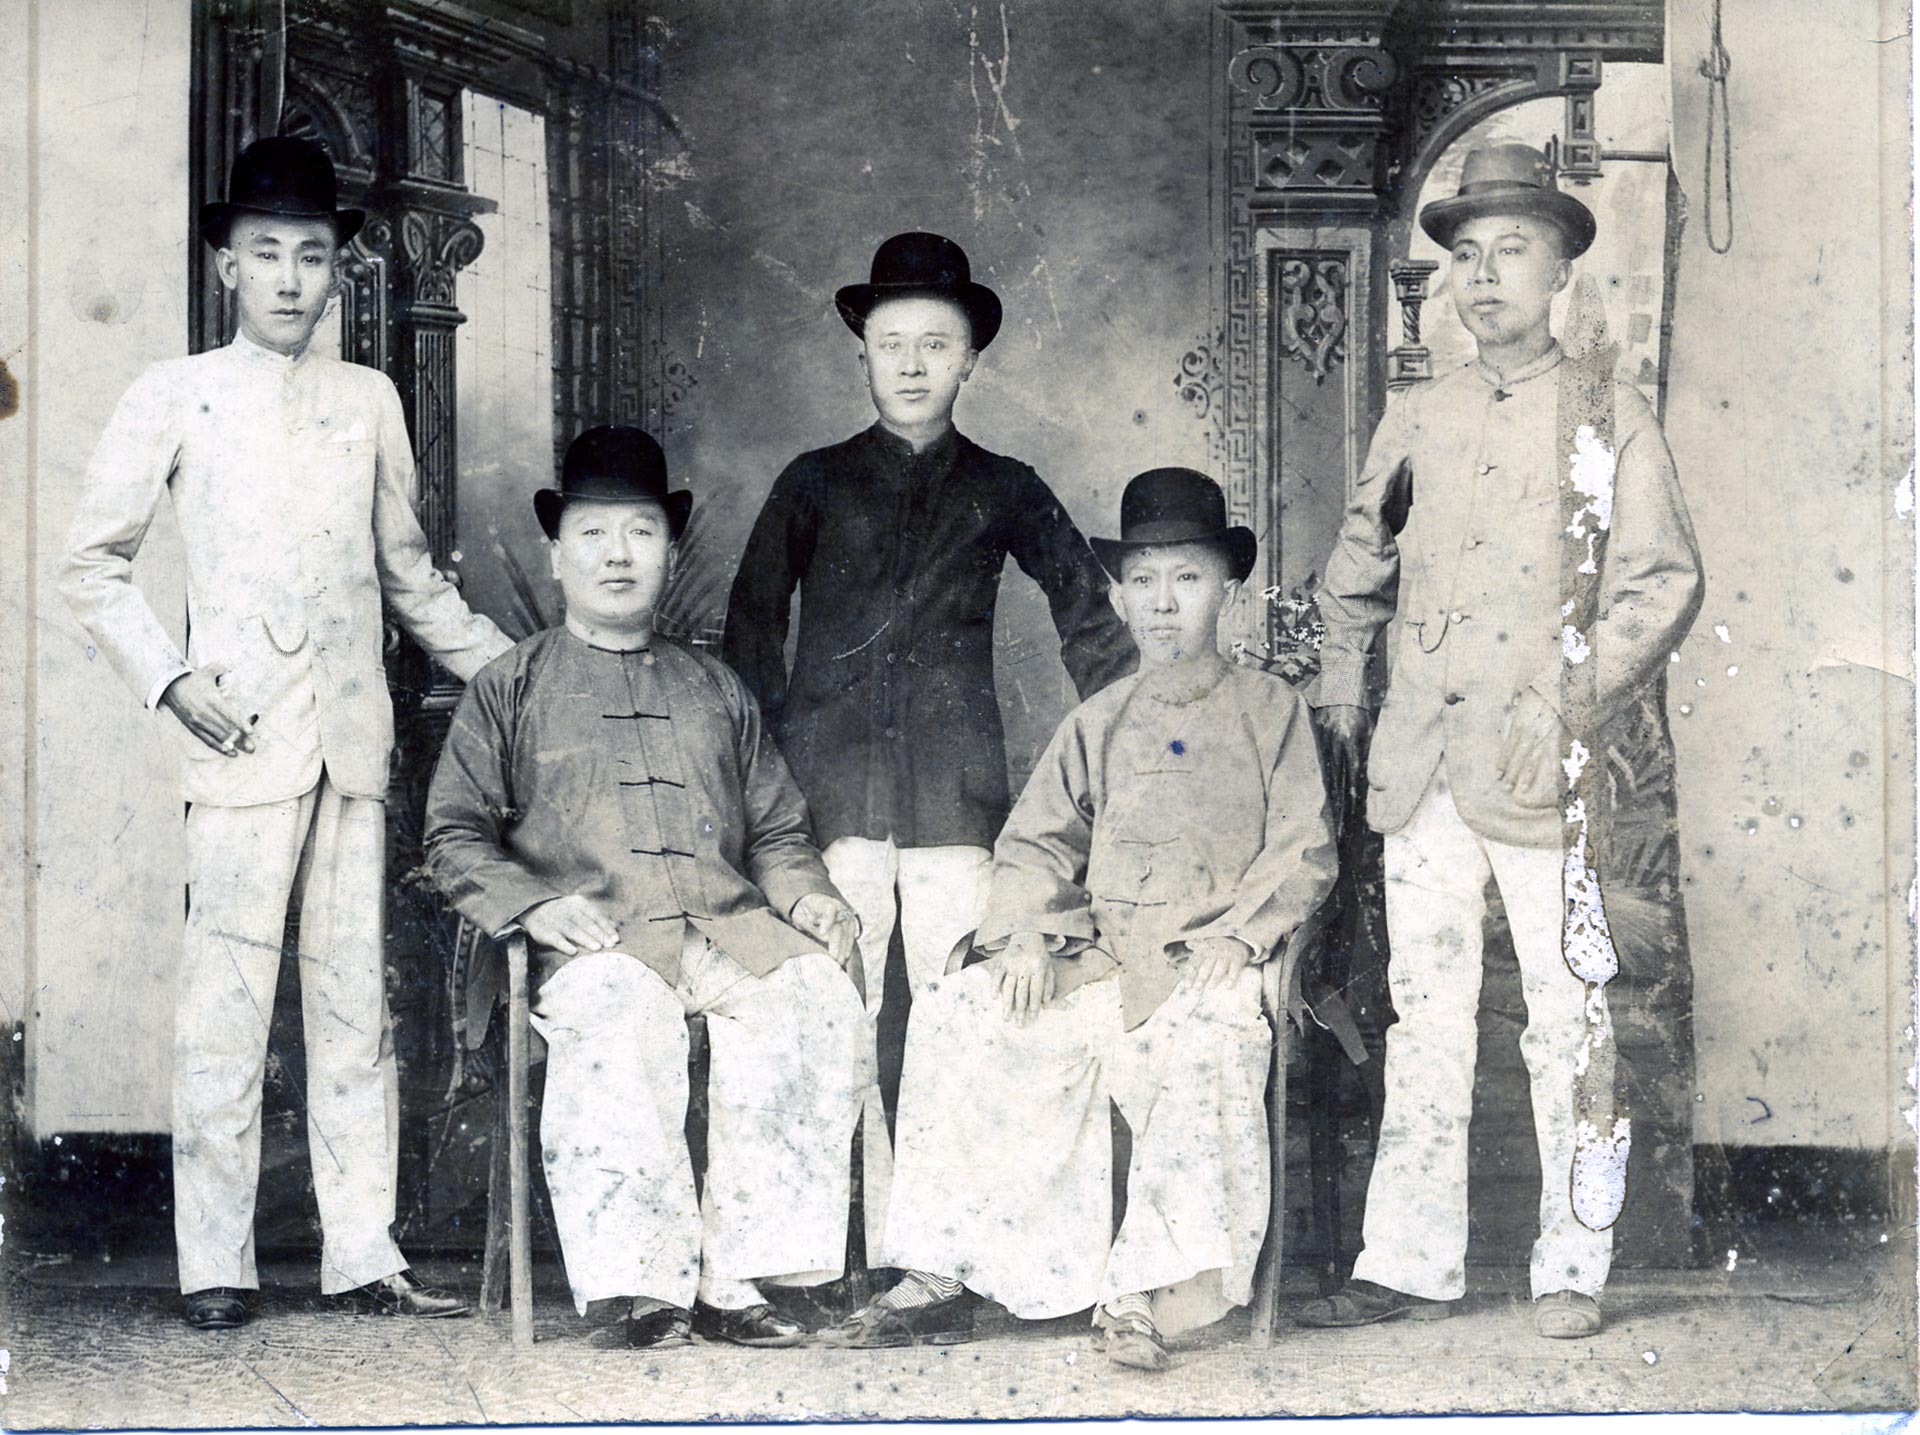 Vintage photo of five Chinese immigrants posing in top hats and traditional shirts